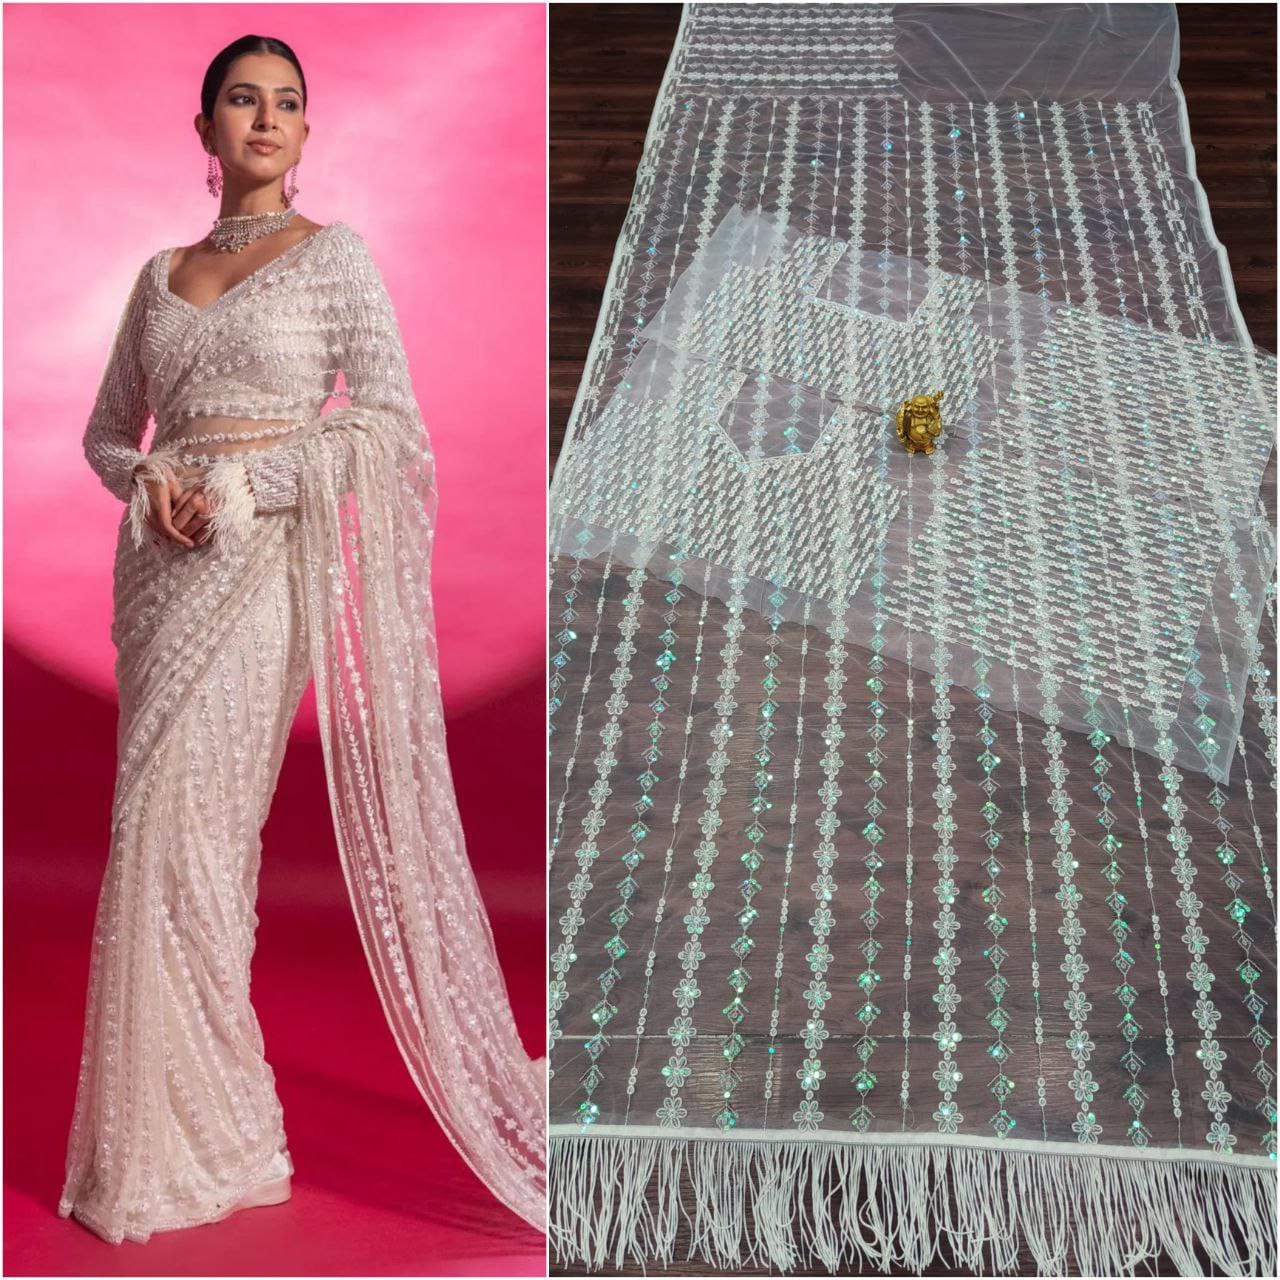 Manali designer saree Peach New Bollywood Blockbuster 5MM Sequins and Multy Embroidery Net Saree with Embroidered Net Blouse